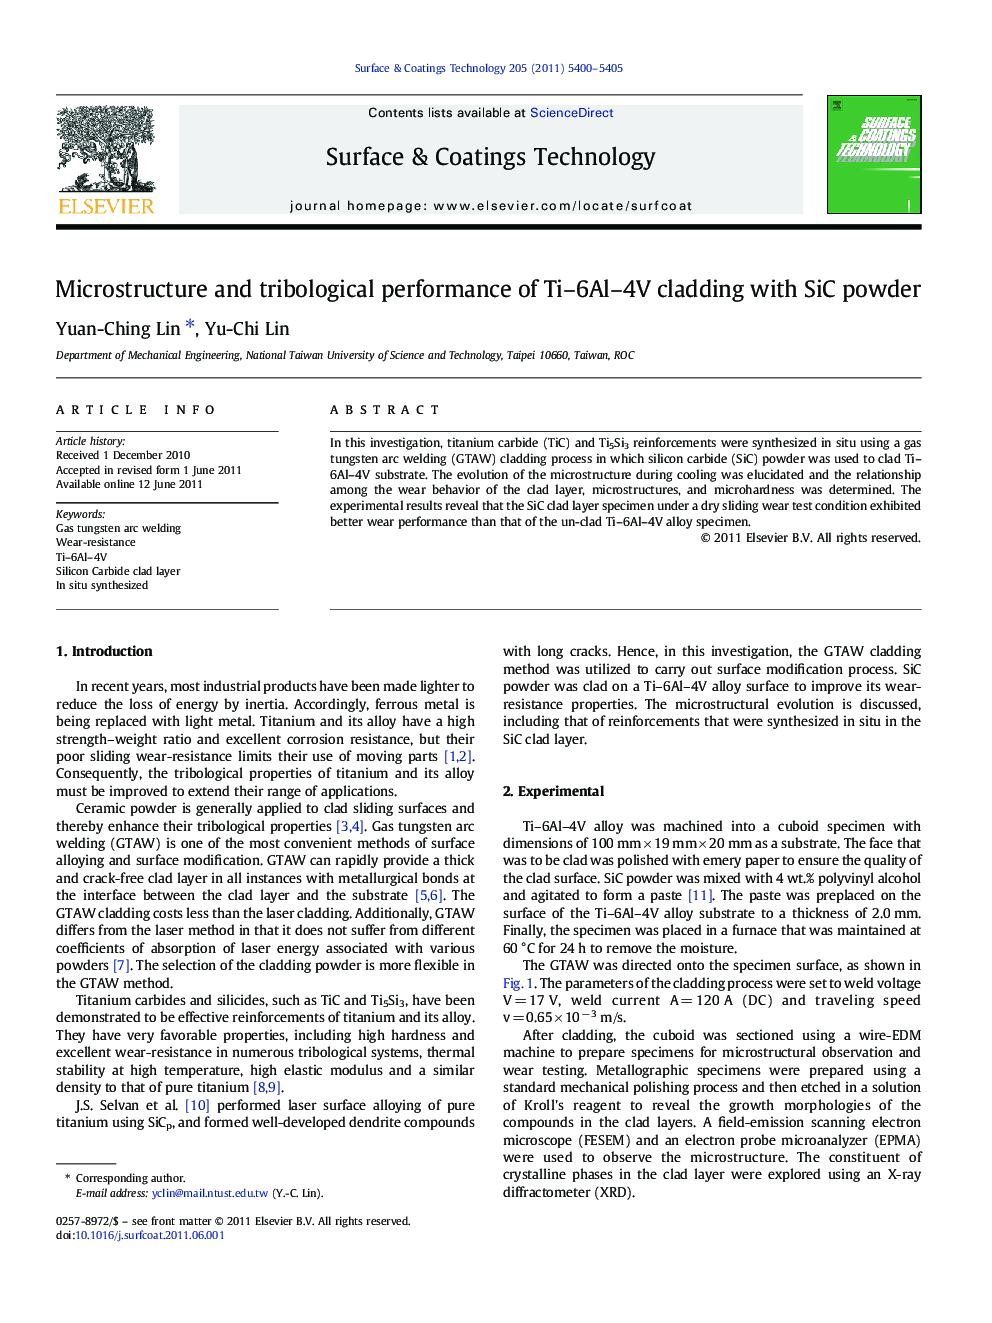 Microstructure and tribological performance of Ti-6Al-4V cladding with SiC powder